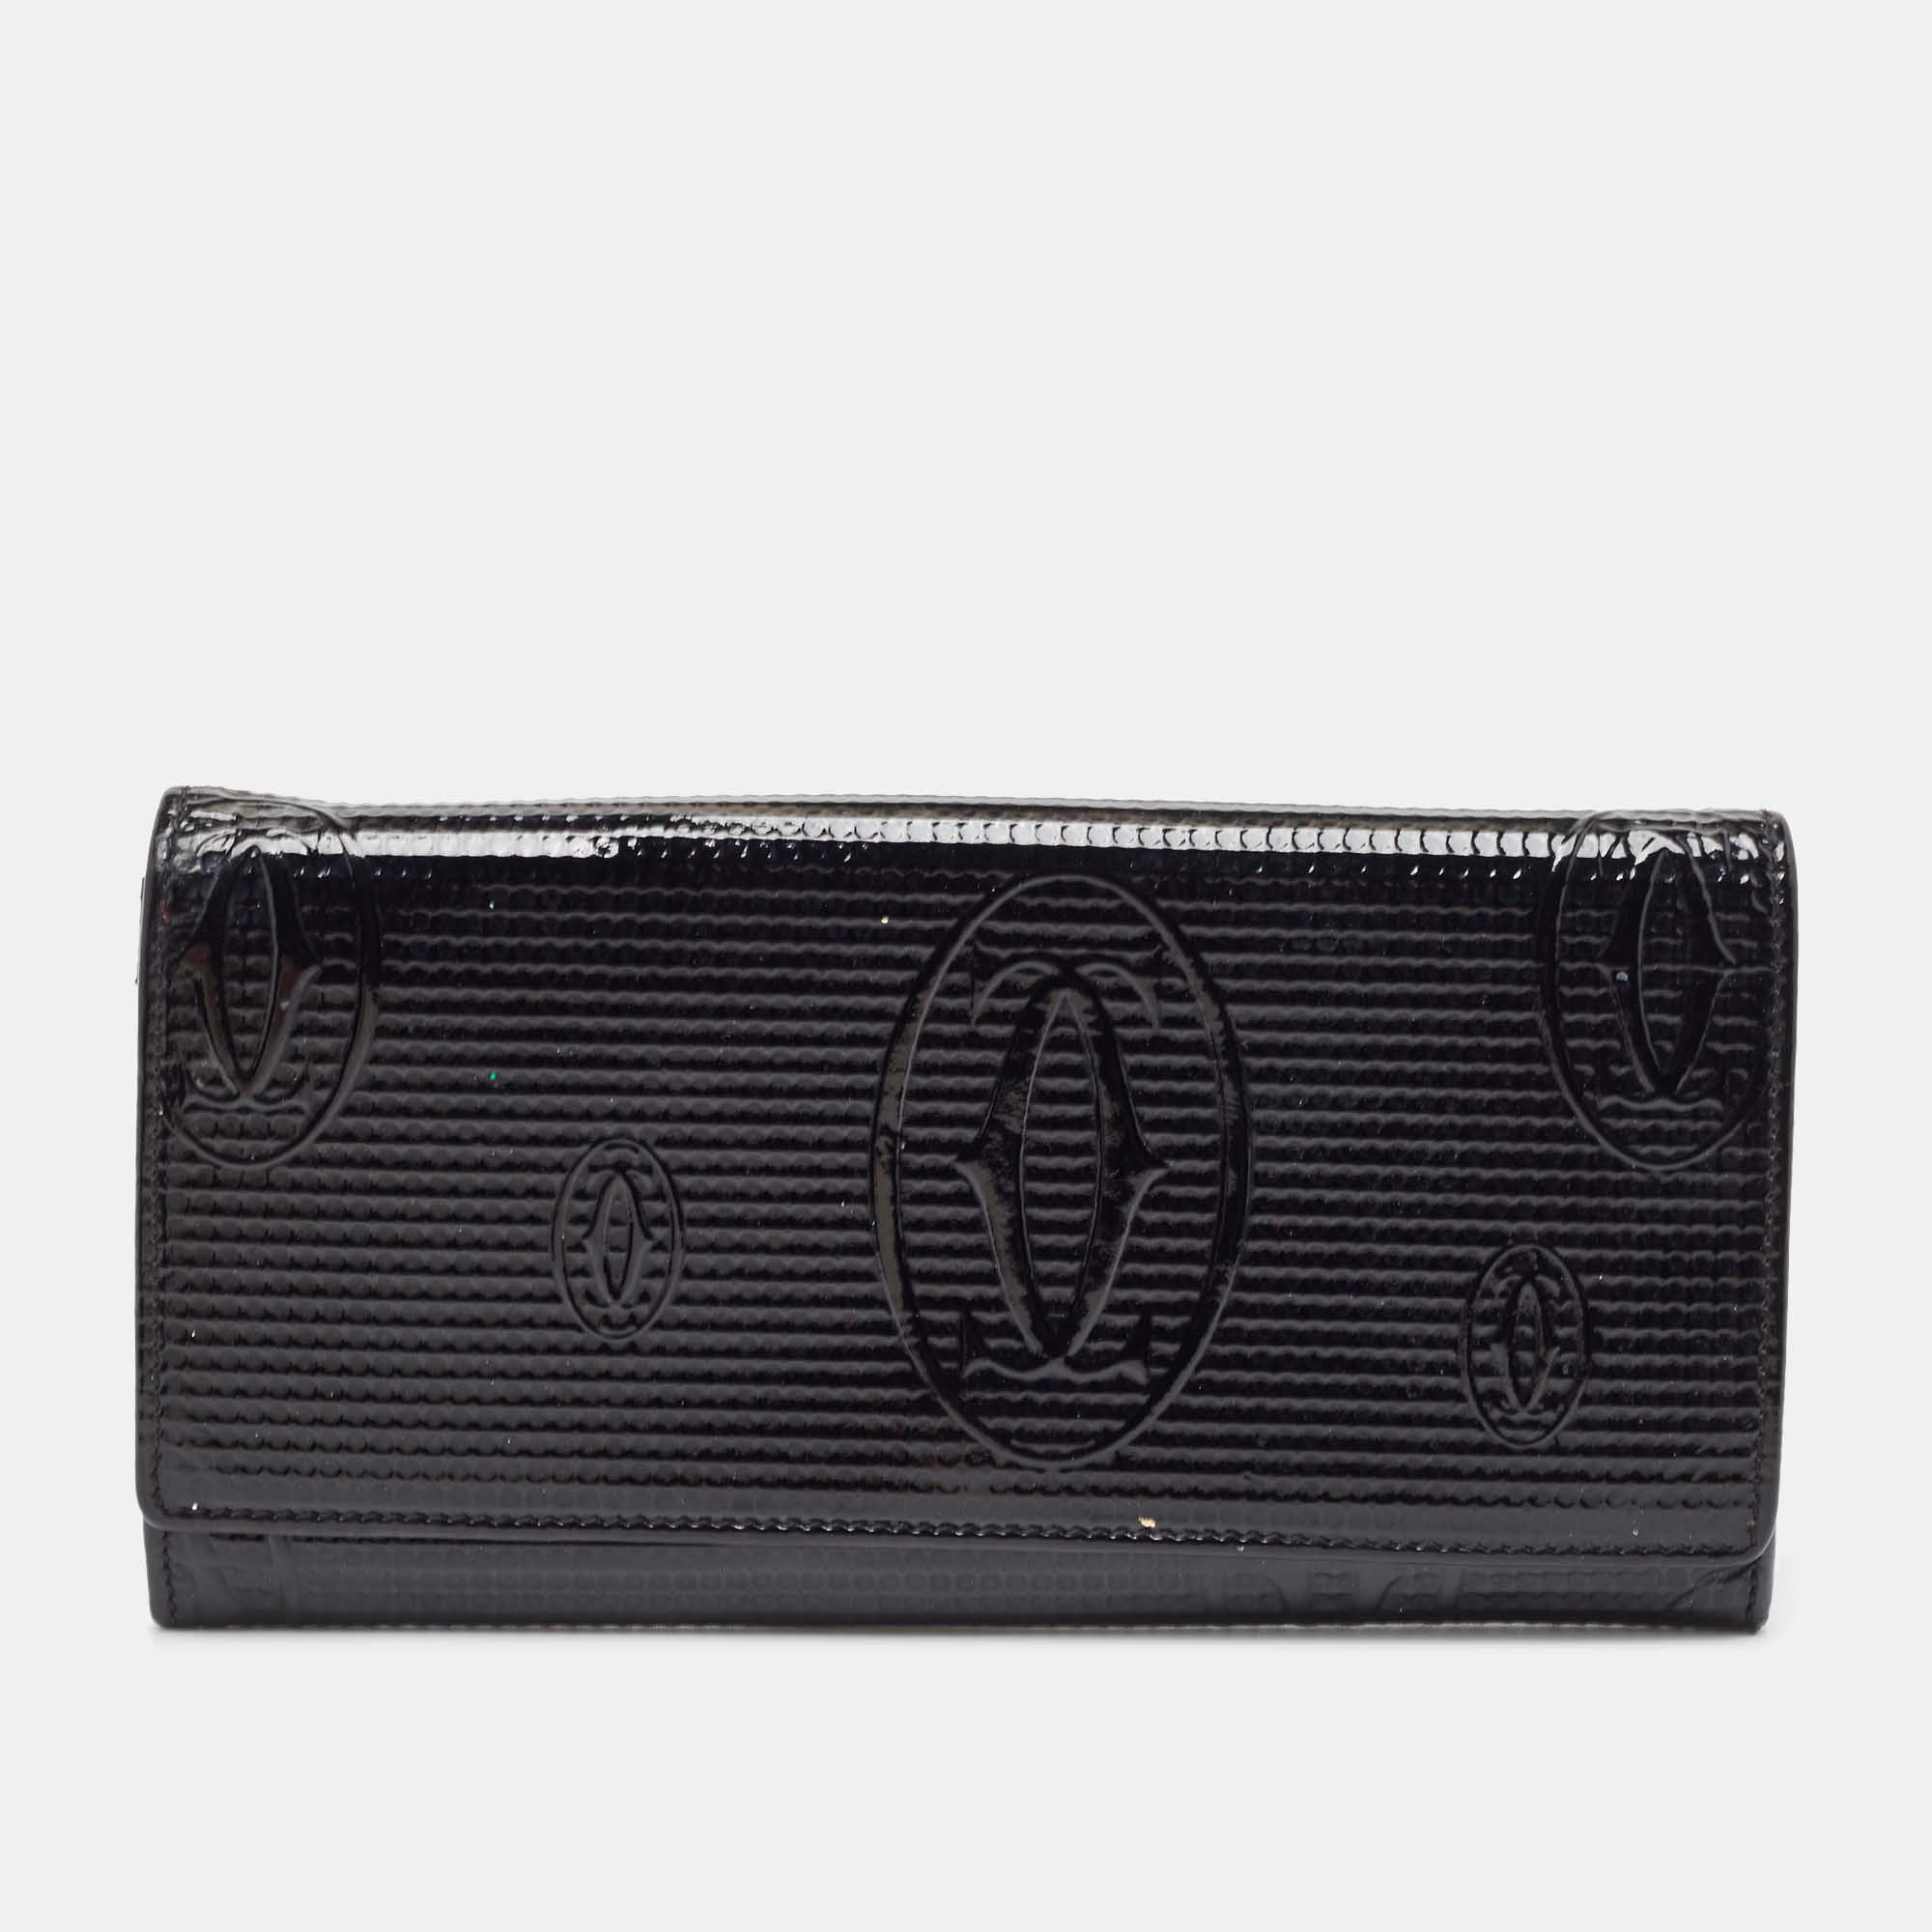 Cartier Black Patent Leather Happy Birthday Continental Wallet